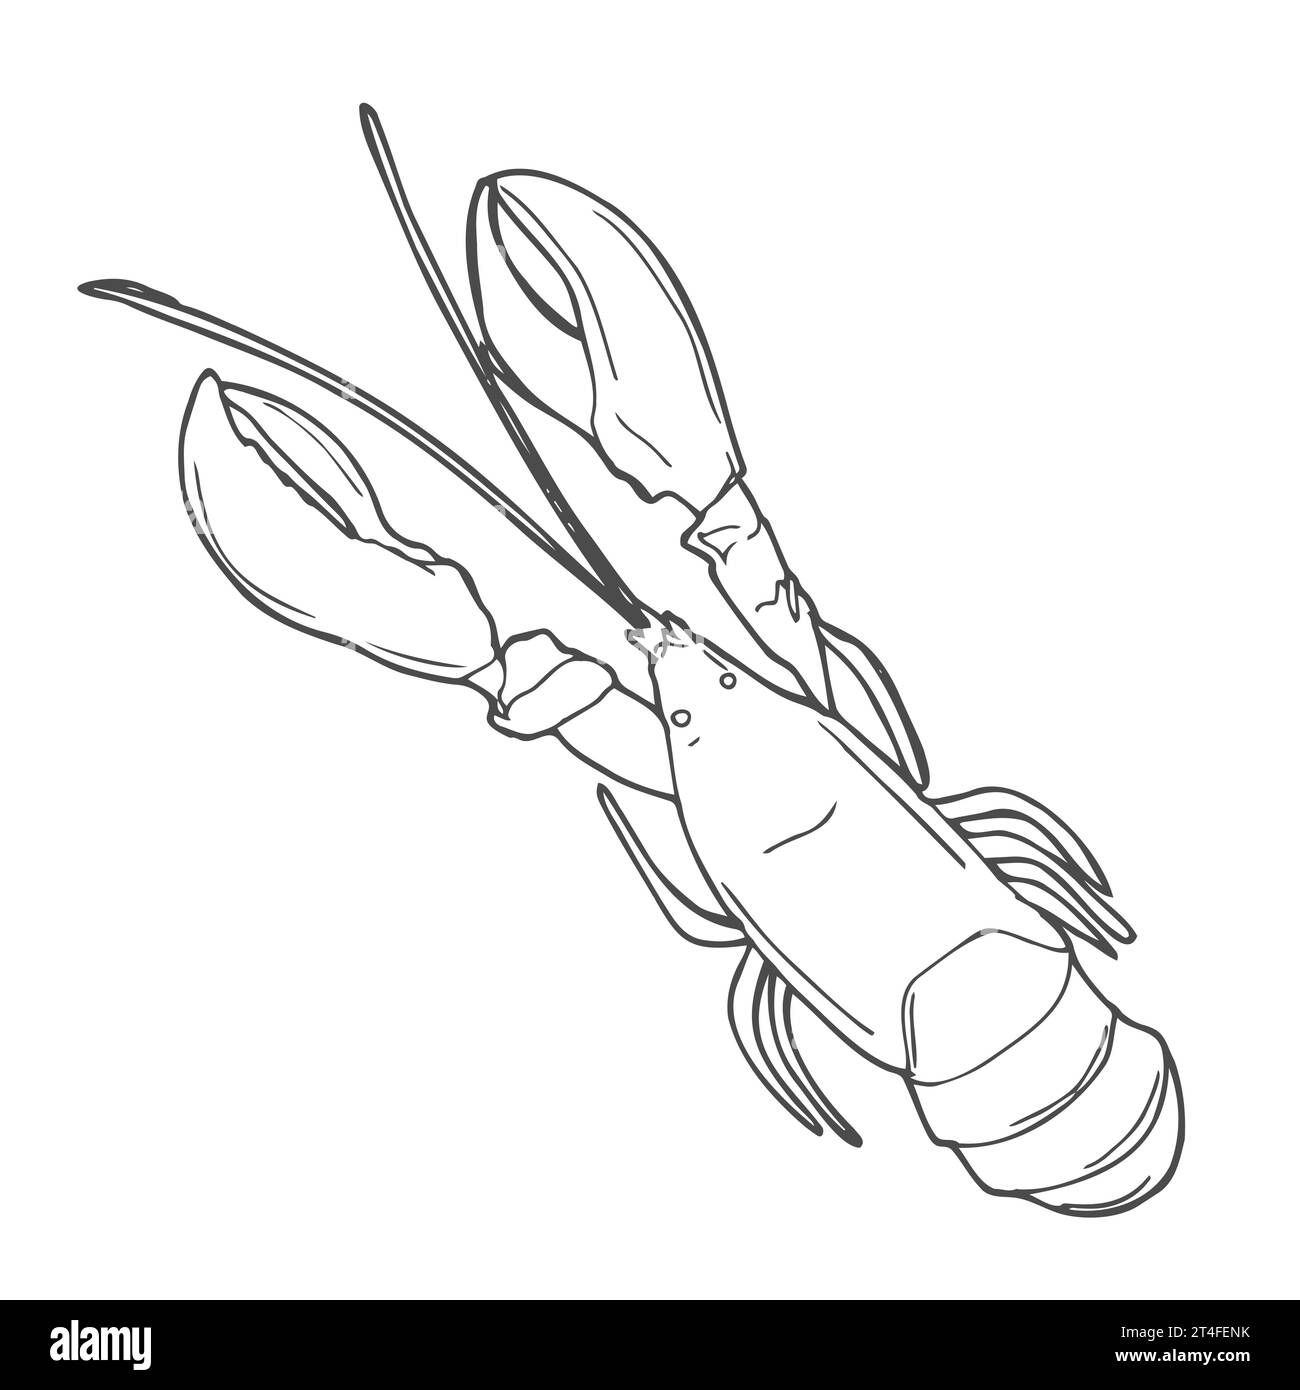 https://c8.alamy.com/comp/2T4FENK/lobster-hand-drawn-outline-doodle-icon-vector-sketch-illustration-of-healthy-seafood-lobster-or-cancer-for-print-web-mobile-and-infographics-isol-2T4FENK.jpg